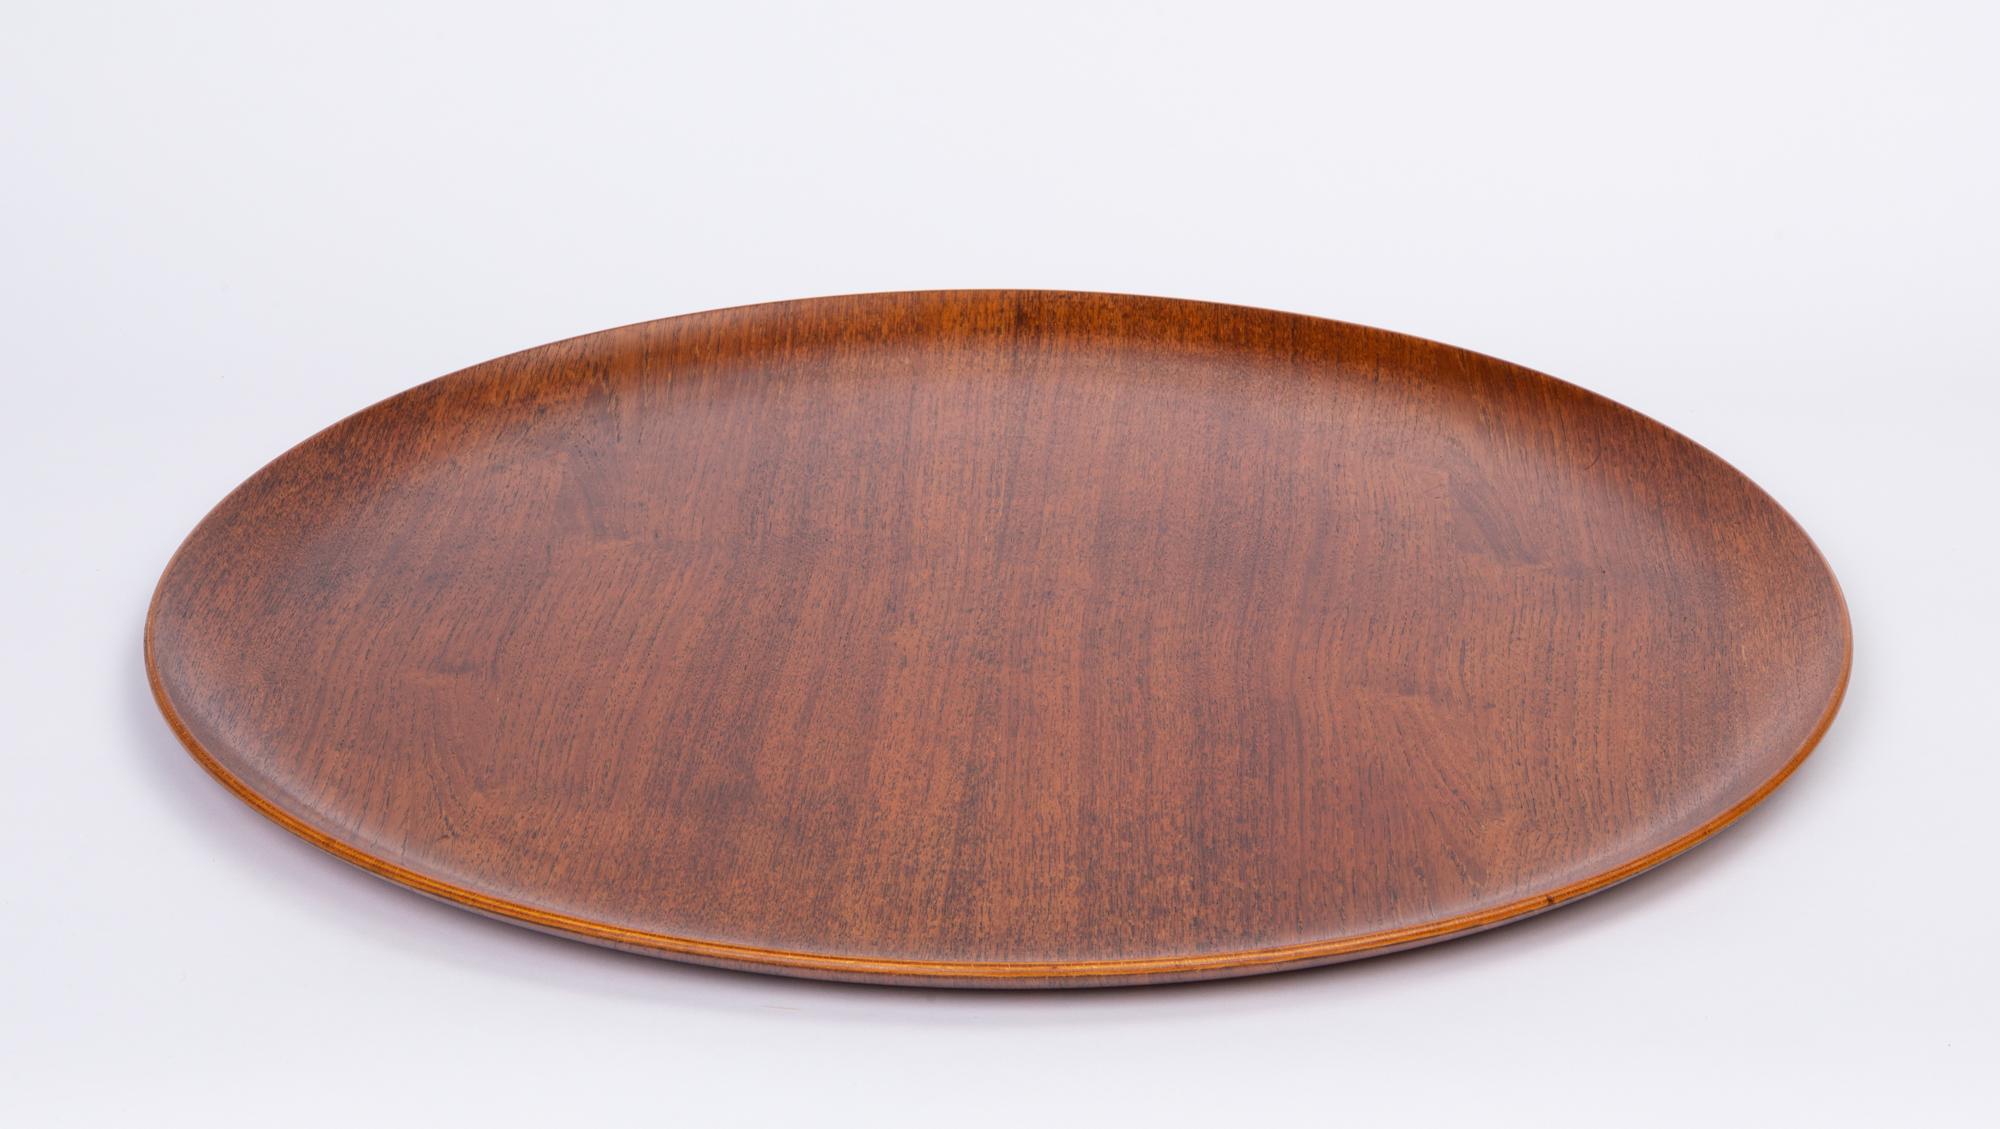 Oiled Jens Quistgaard Style Teak Tray with Curved Edge